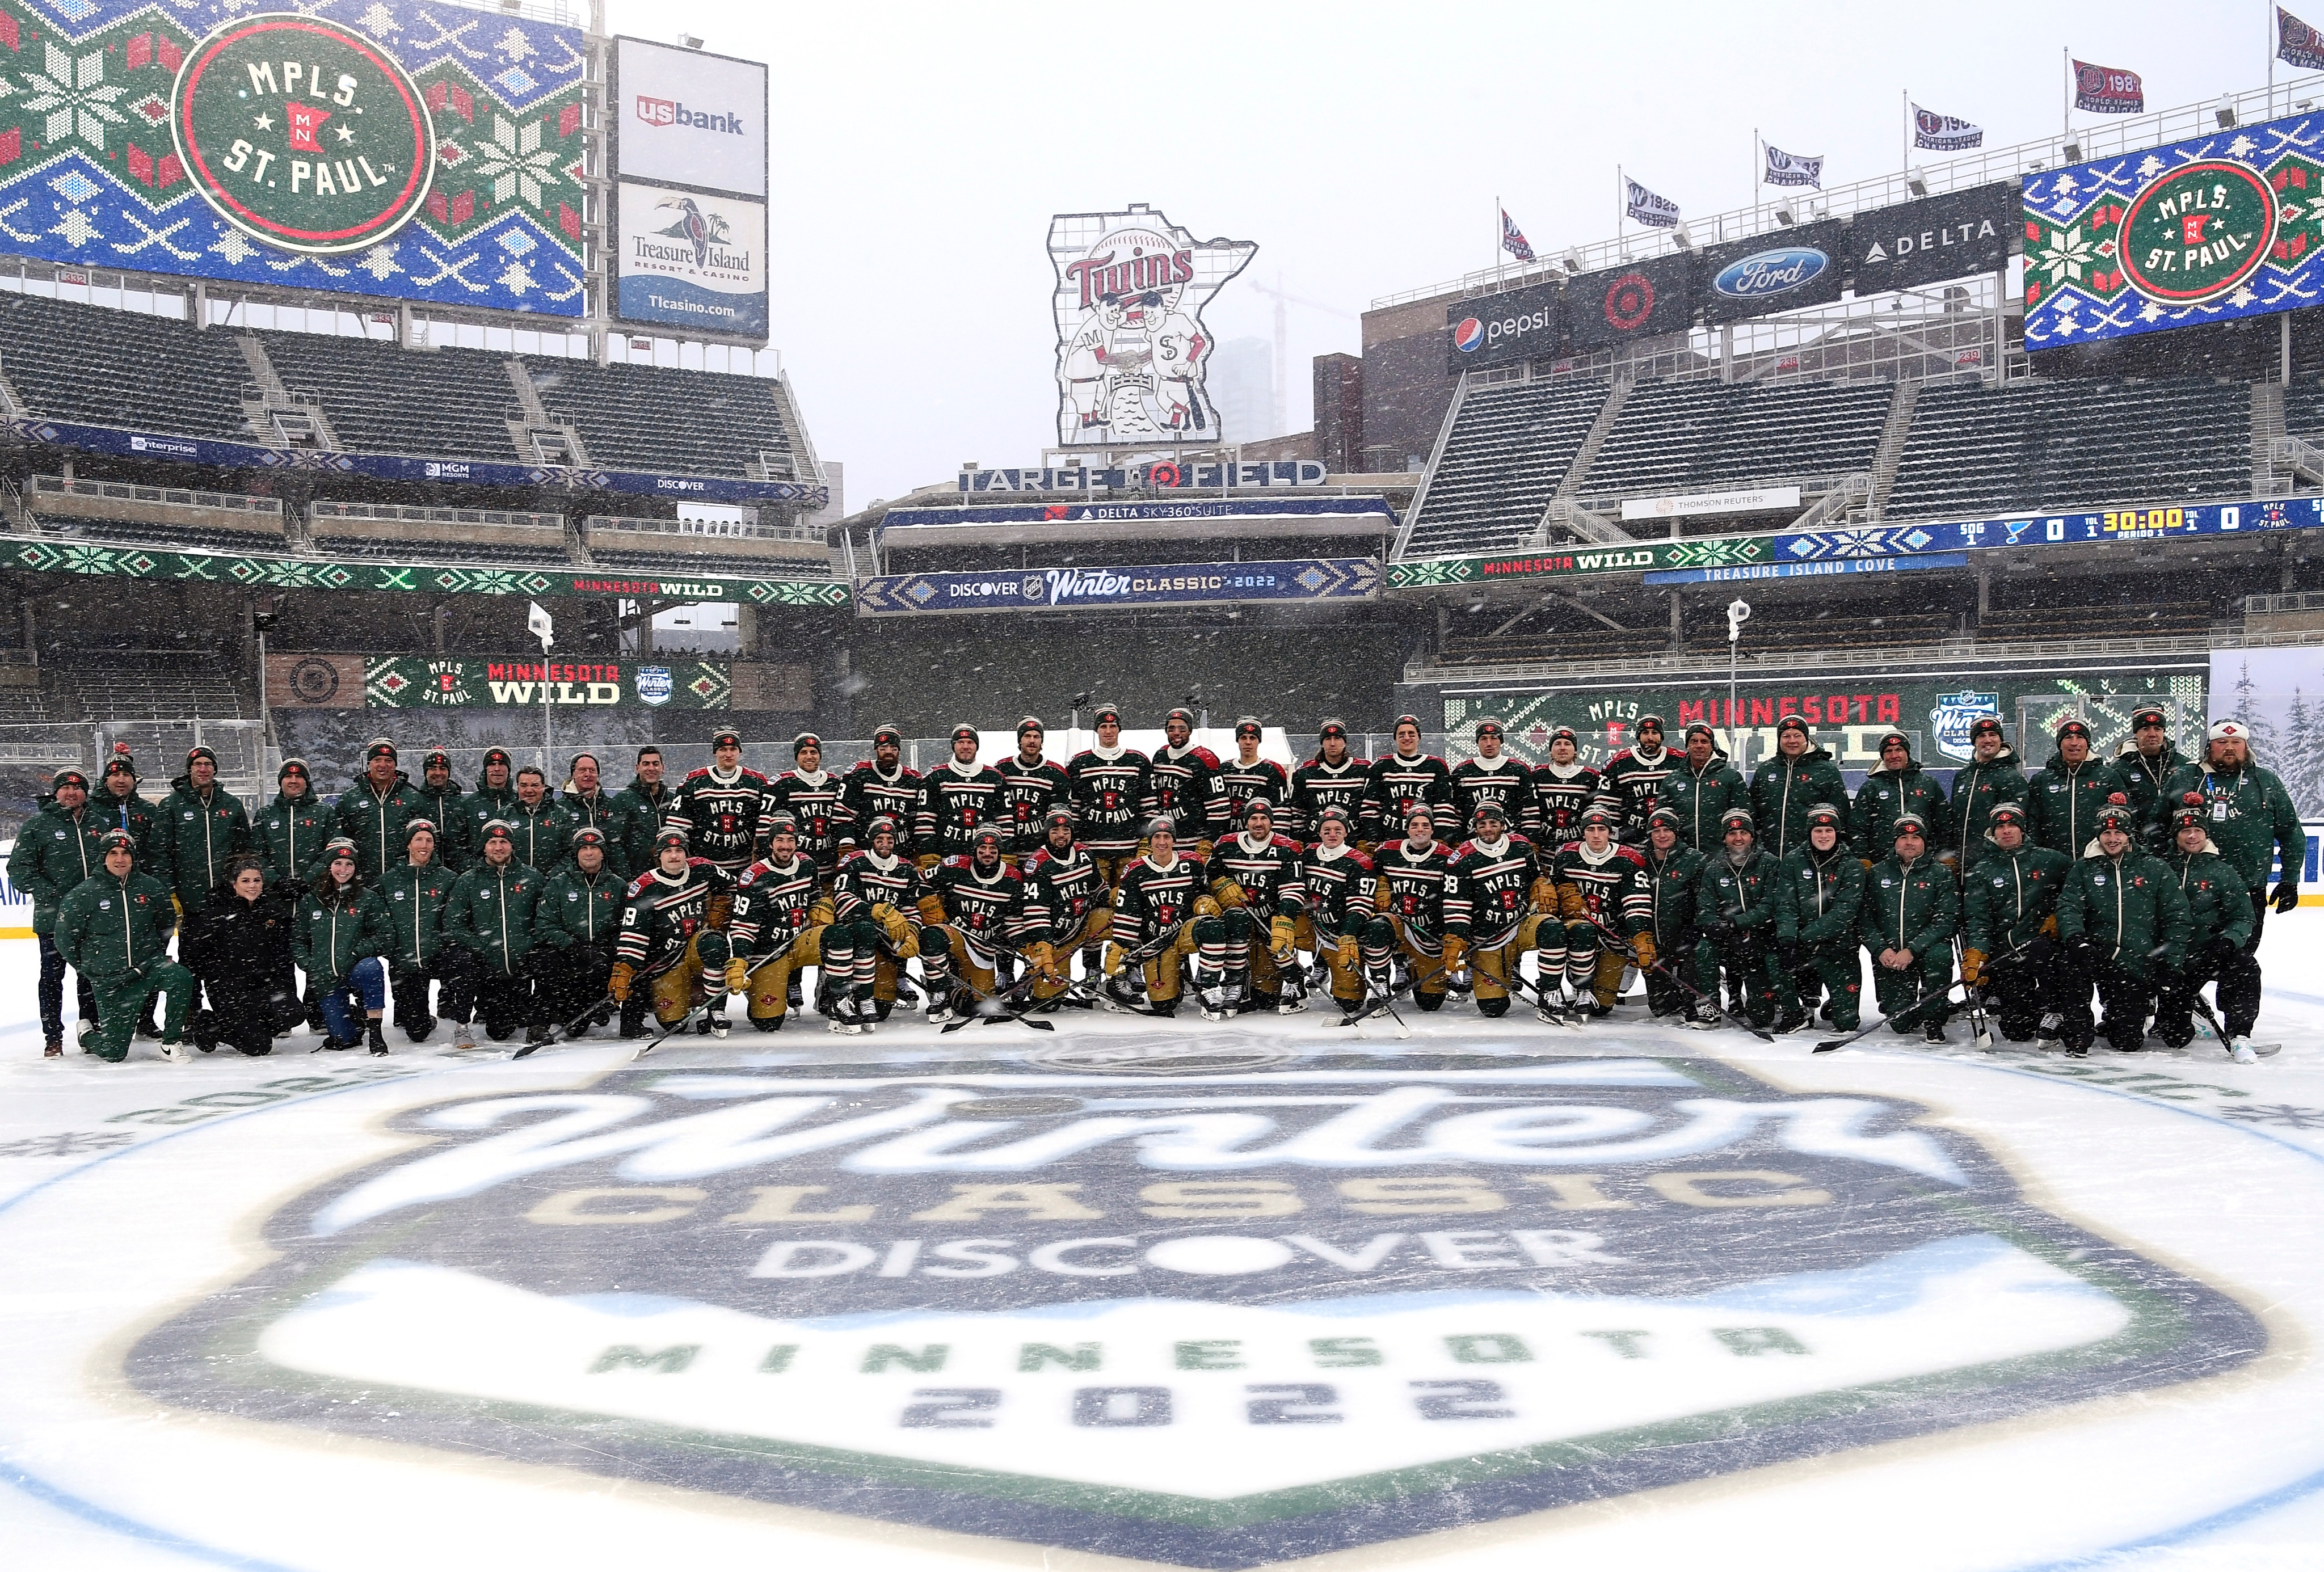 Minnesota Wild on X: Let's go! Which #WinterClassic wallpaper is your  favorite? #mnwild